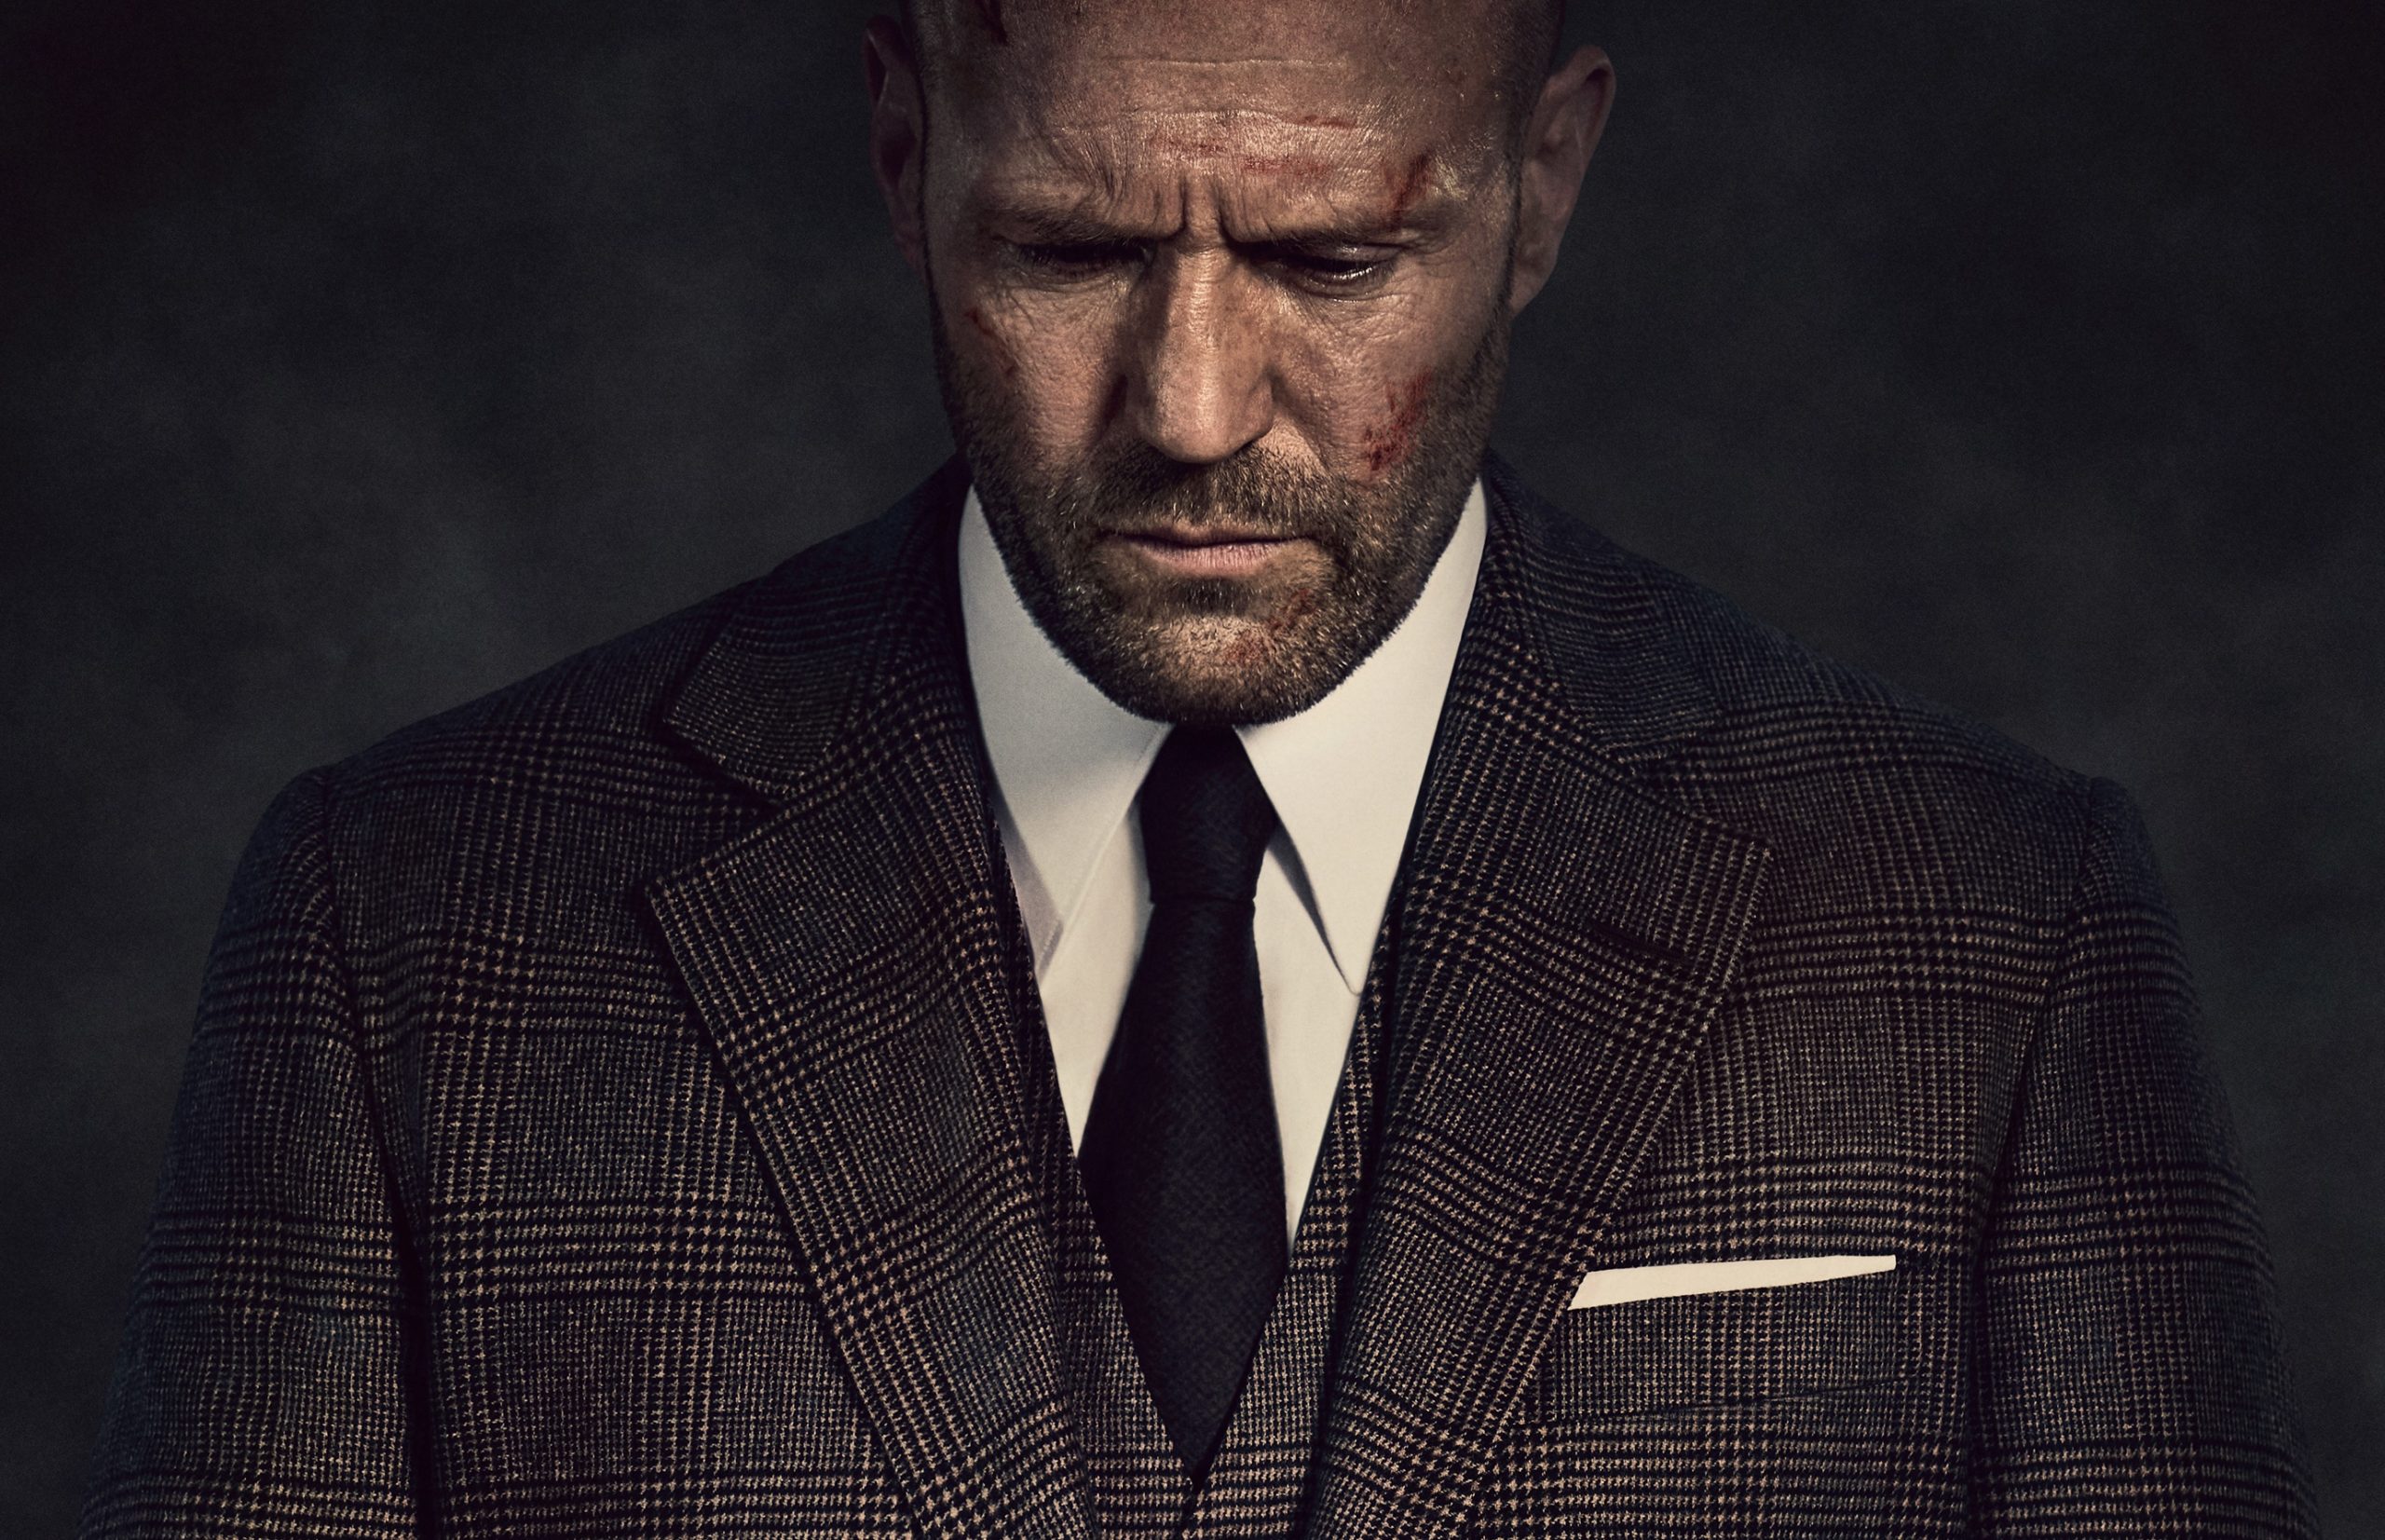 New Poster for Wrath of Man with Jason Statham